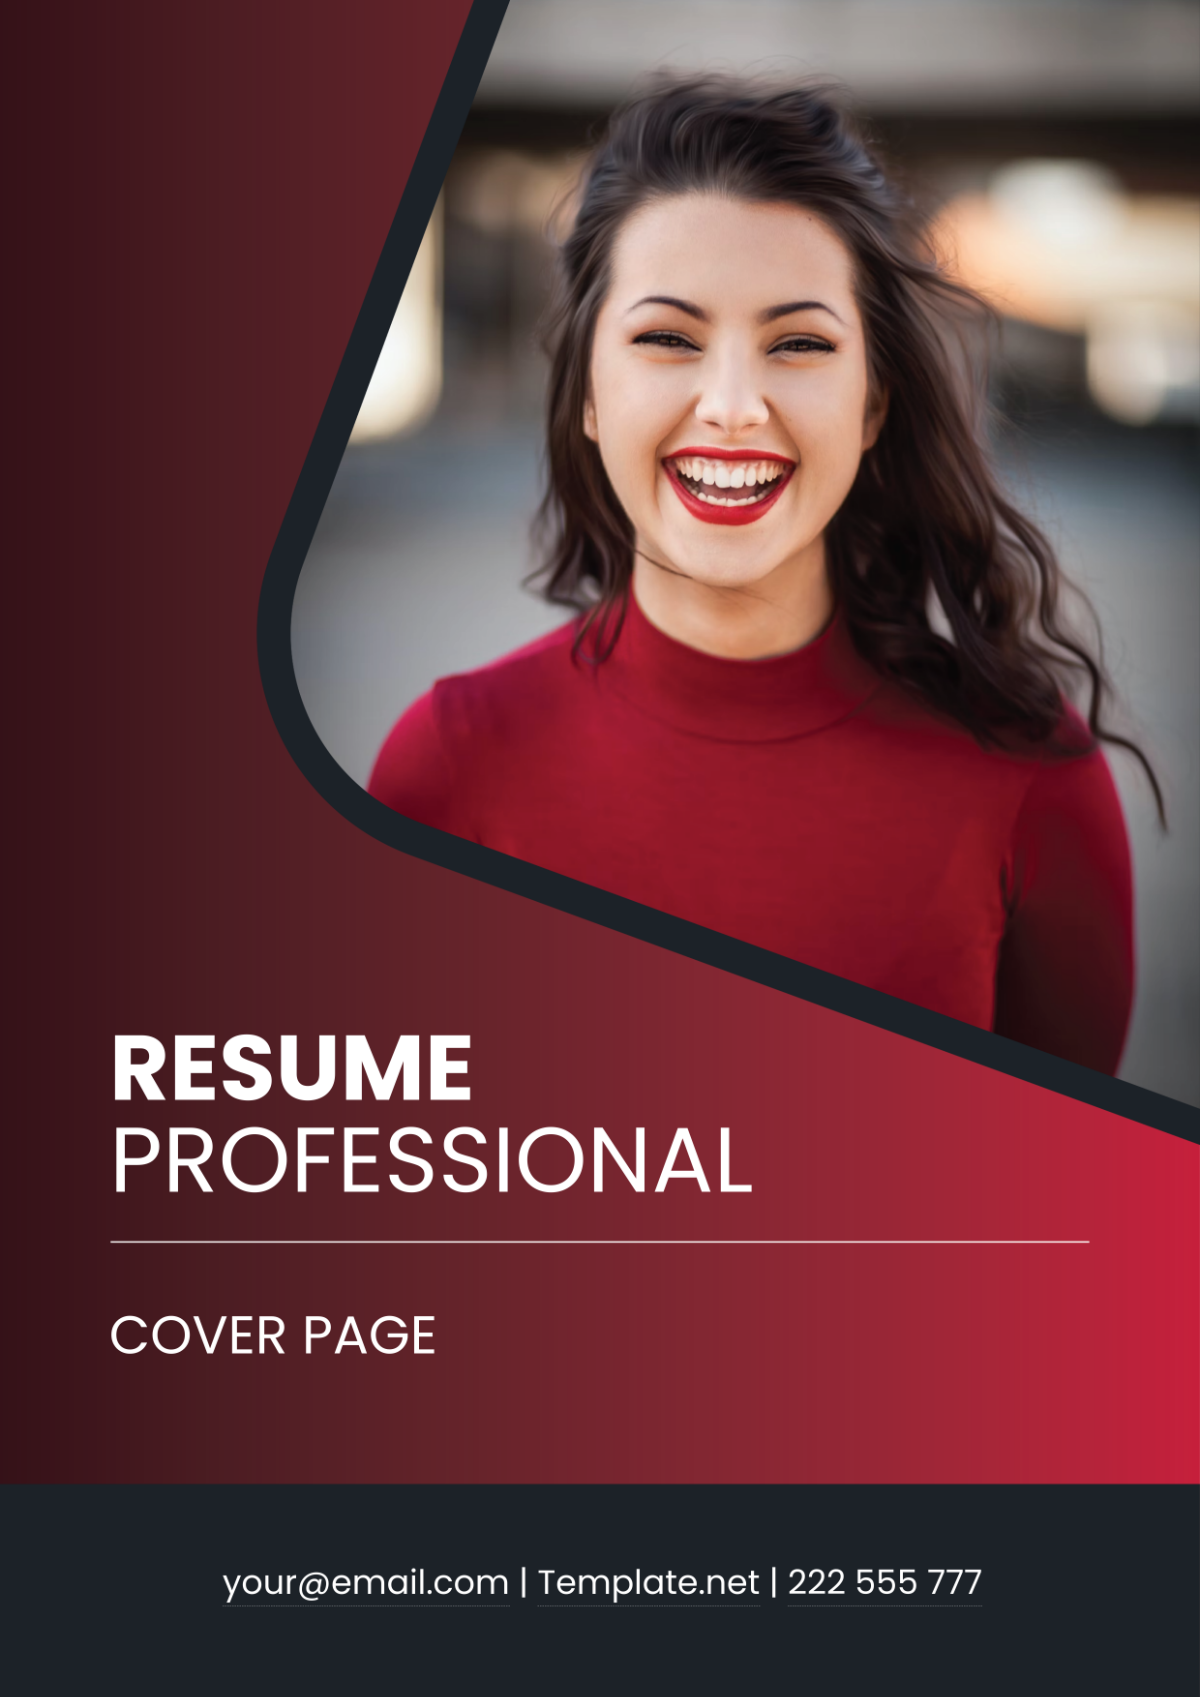 Resume Professional Cover Page Template